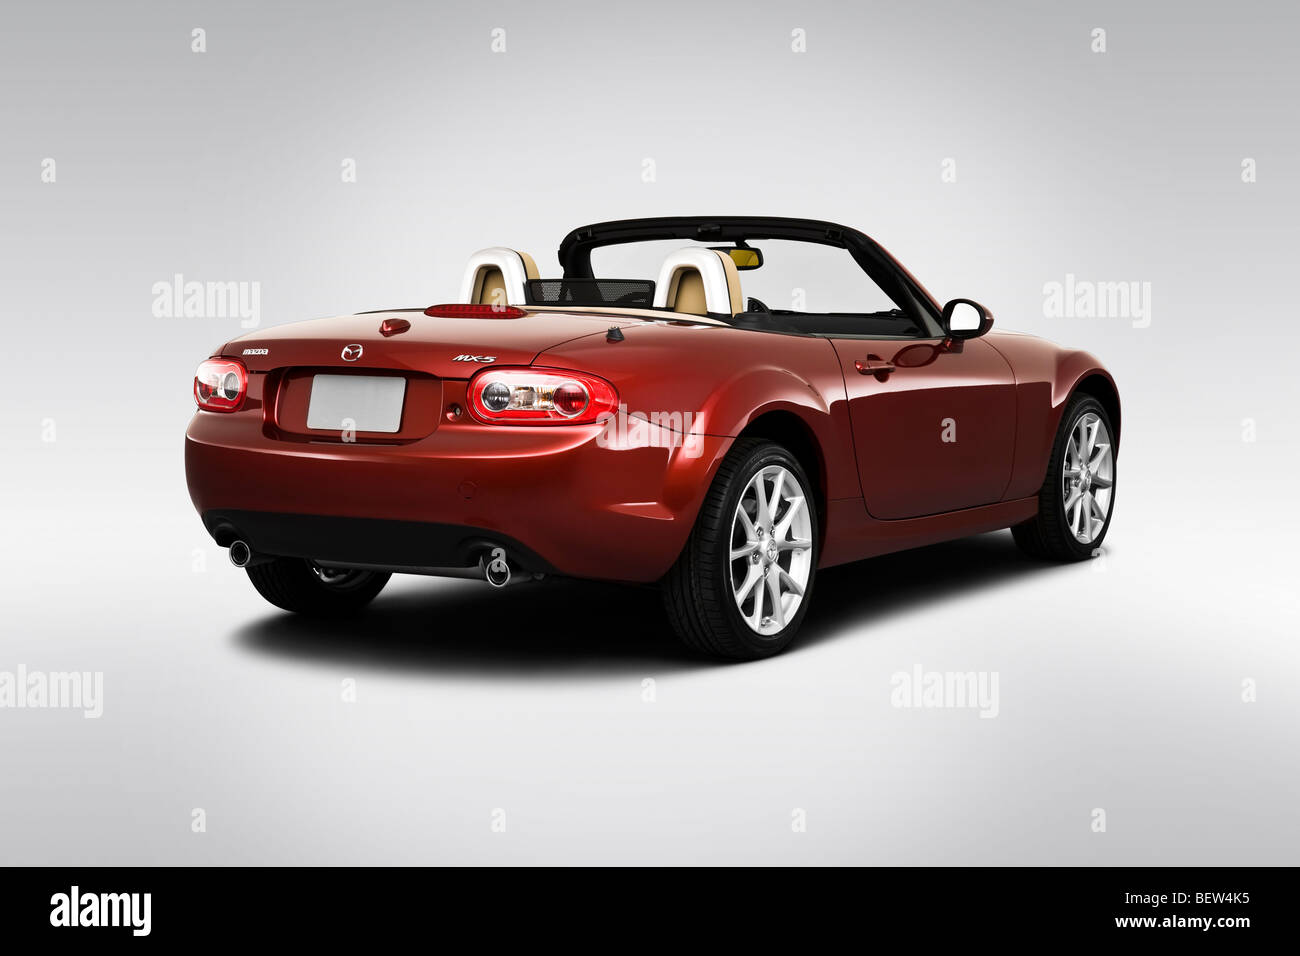 2010 Mazda MX-5 Grand Touring in Red - Rear angle view Stock Photo